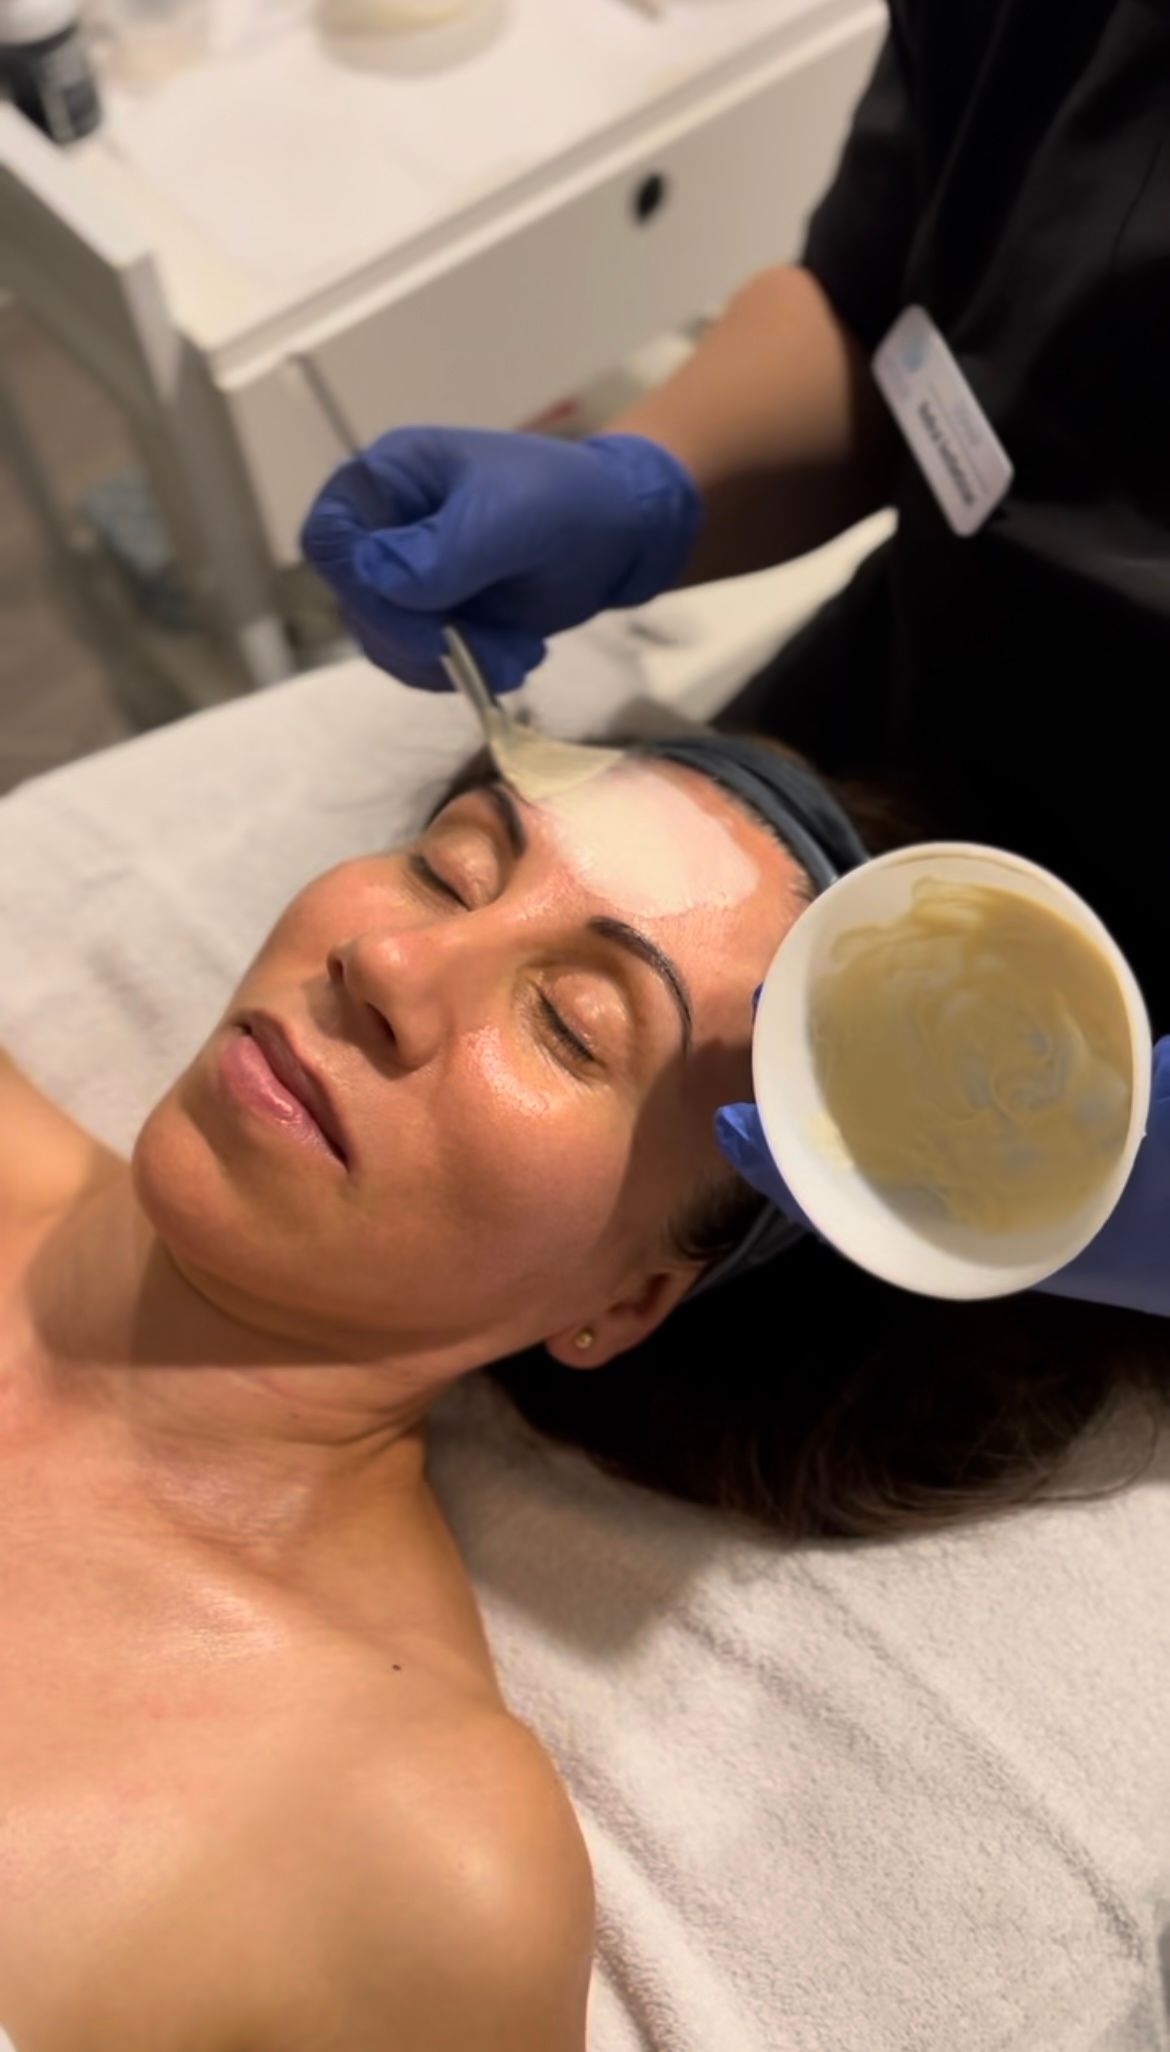 A woman is laying on a bed getting a facial treatment.